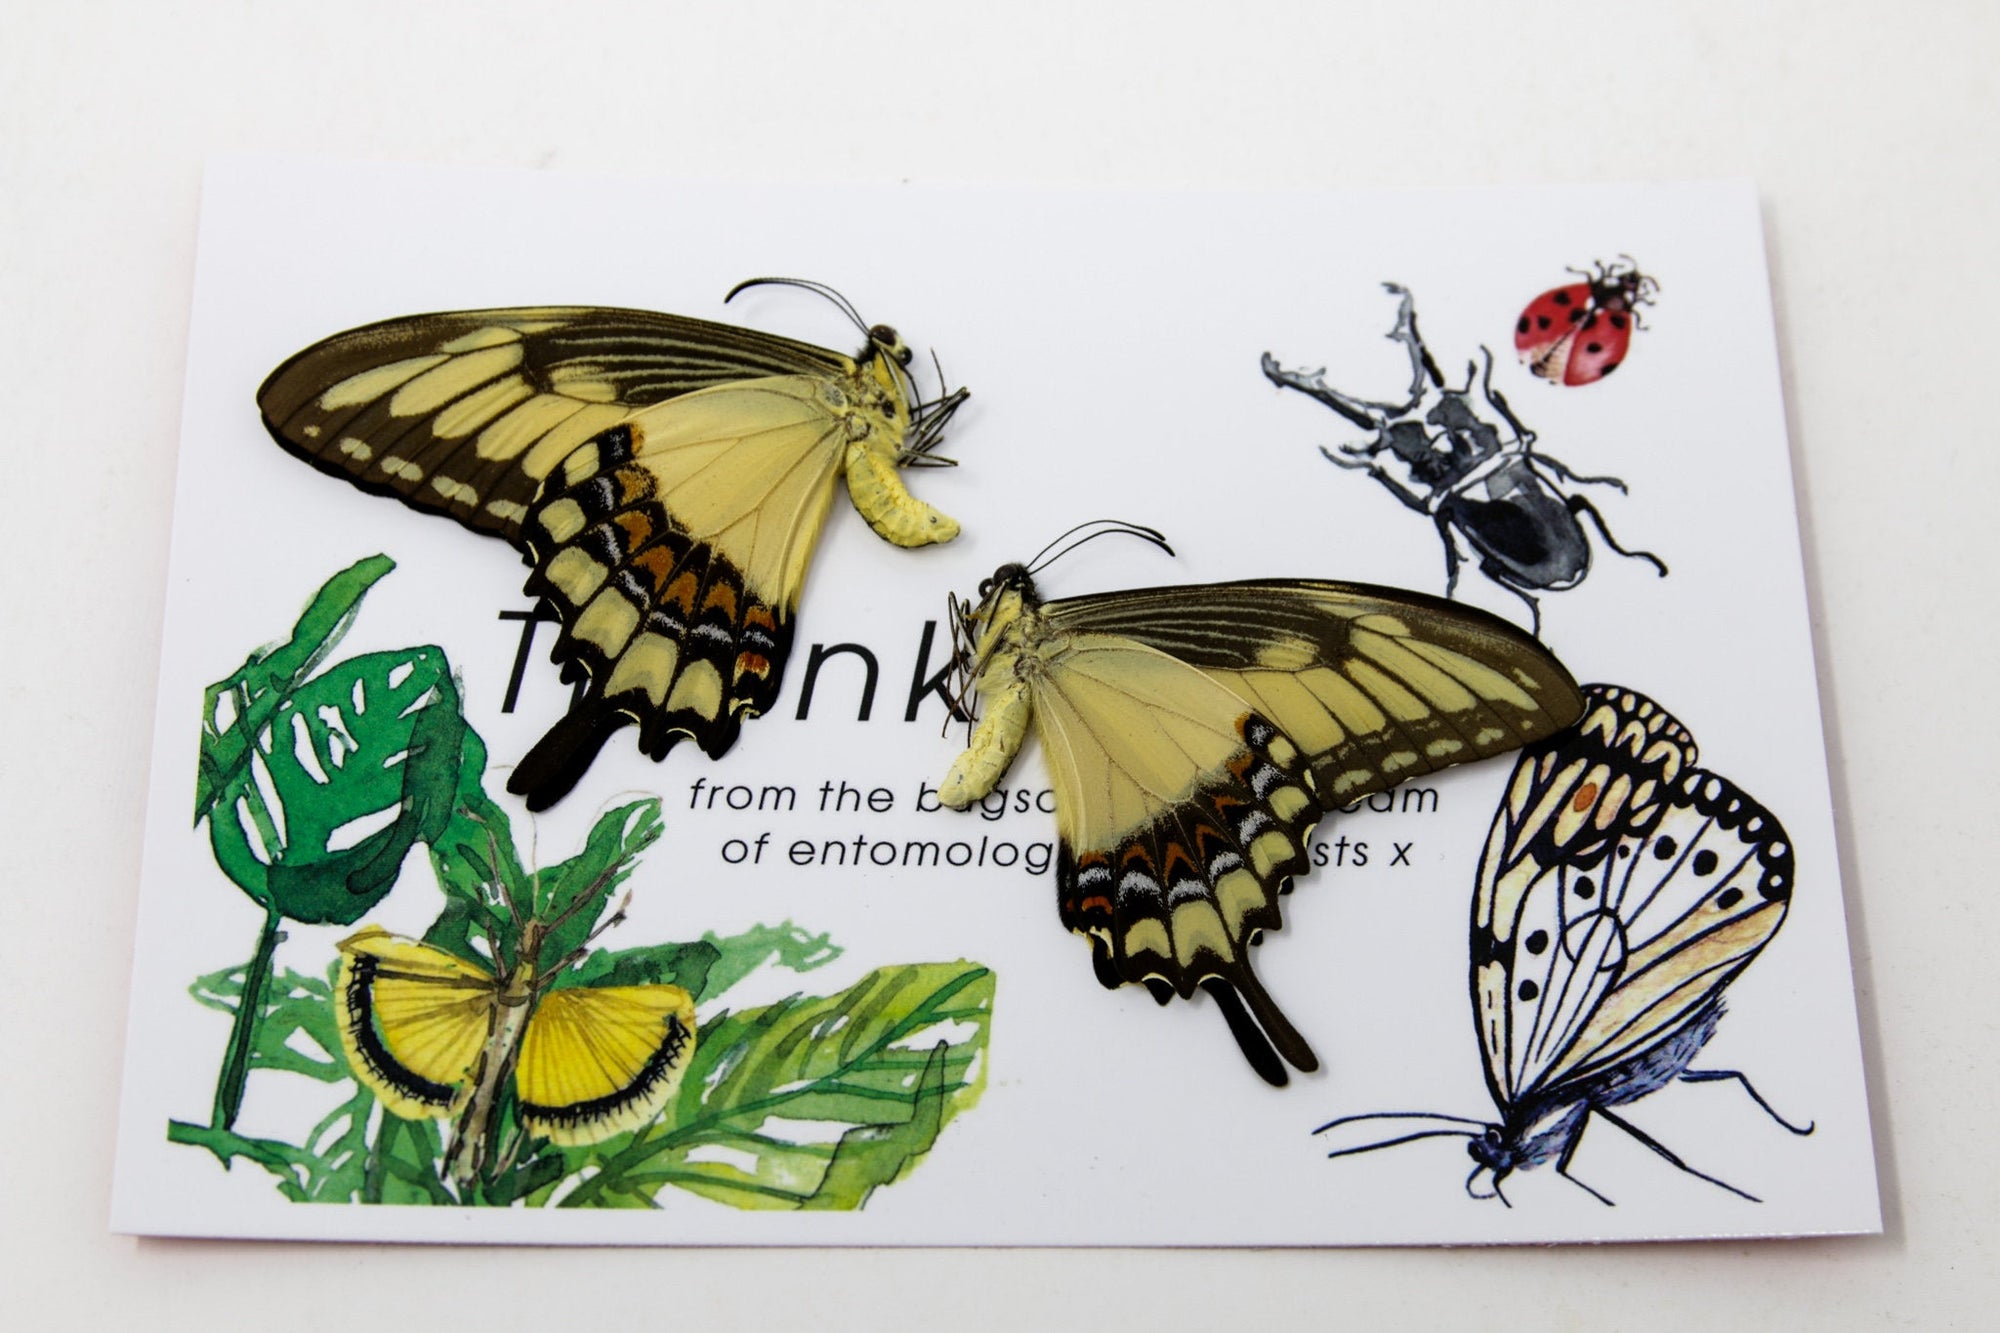 2 x Papilio lycophron | Banded Swallowtail | A1 Unmounted Specimen